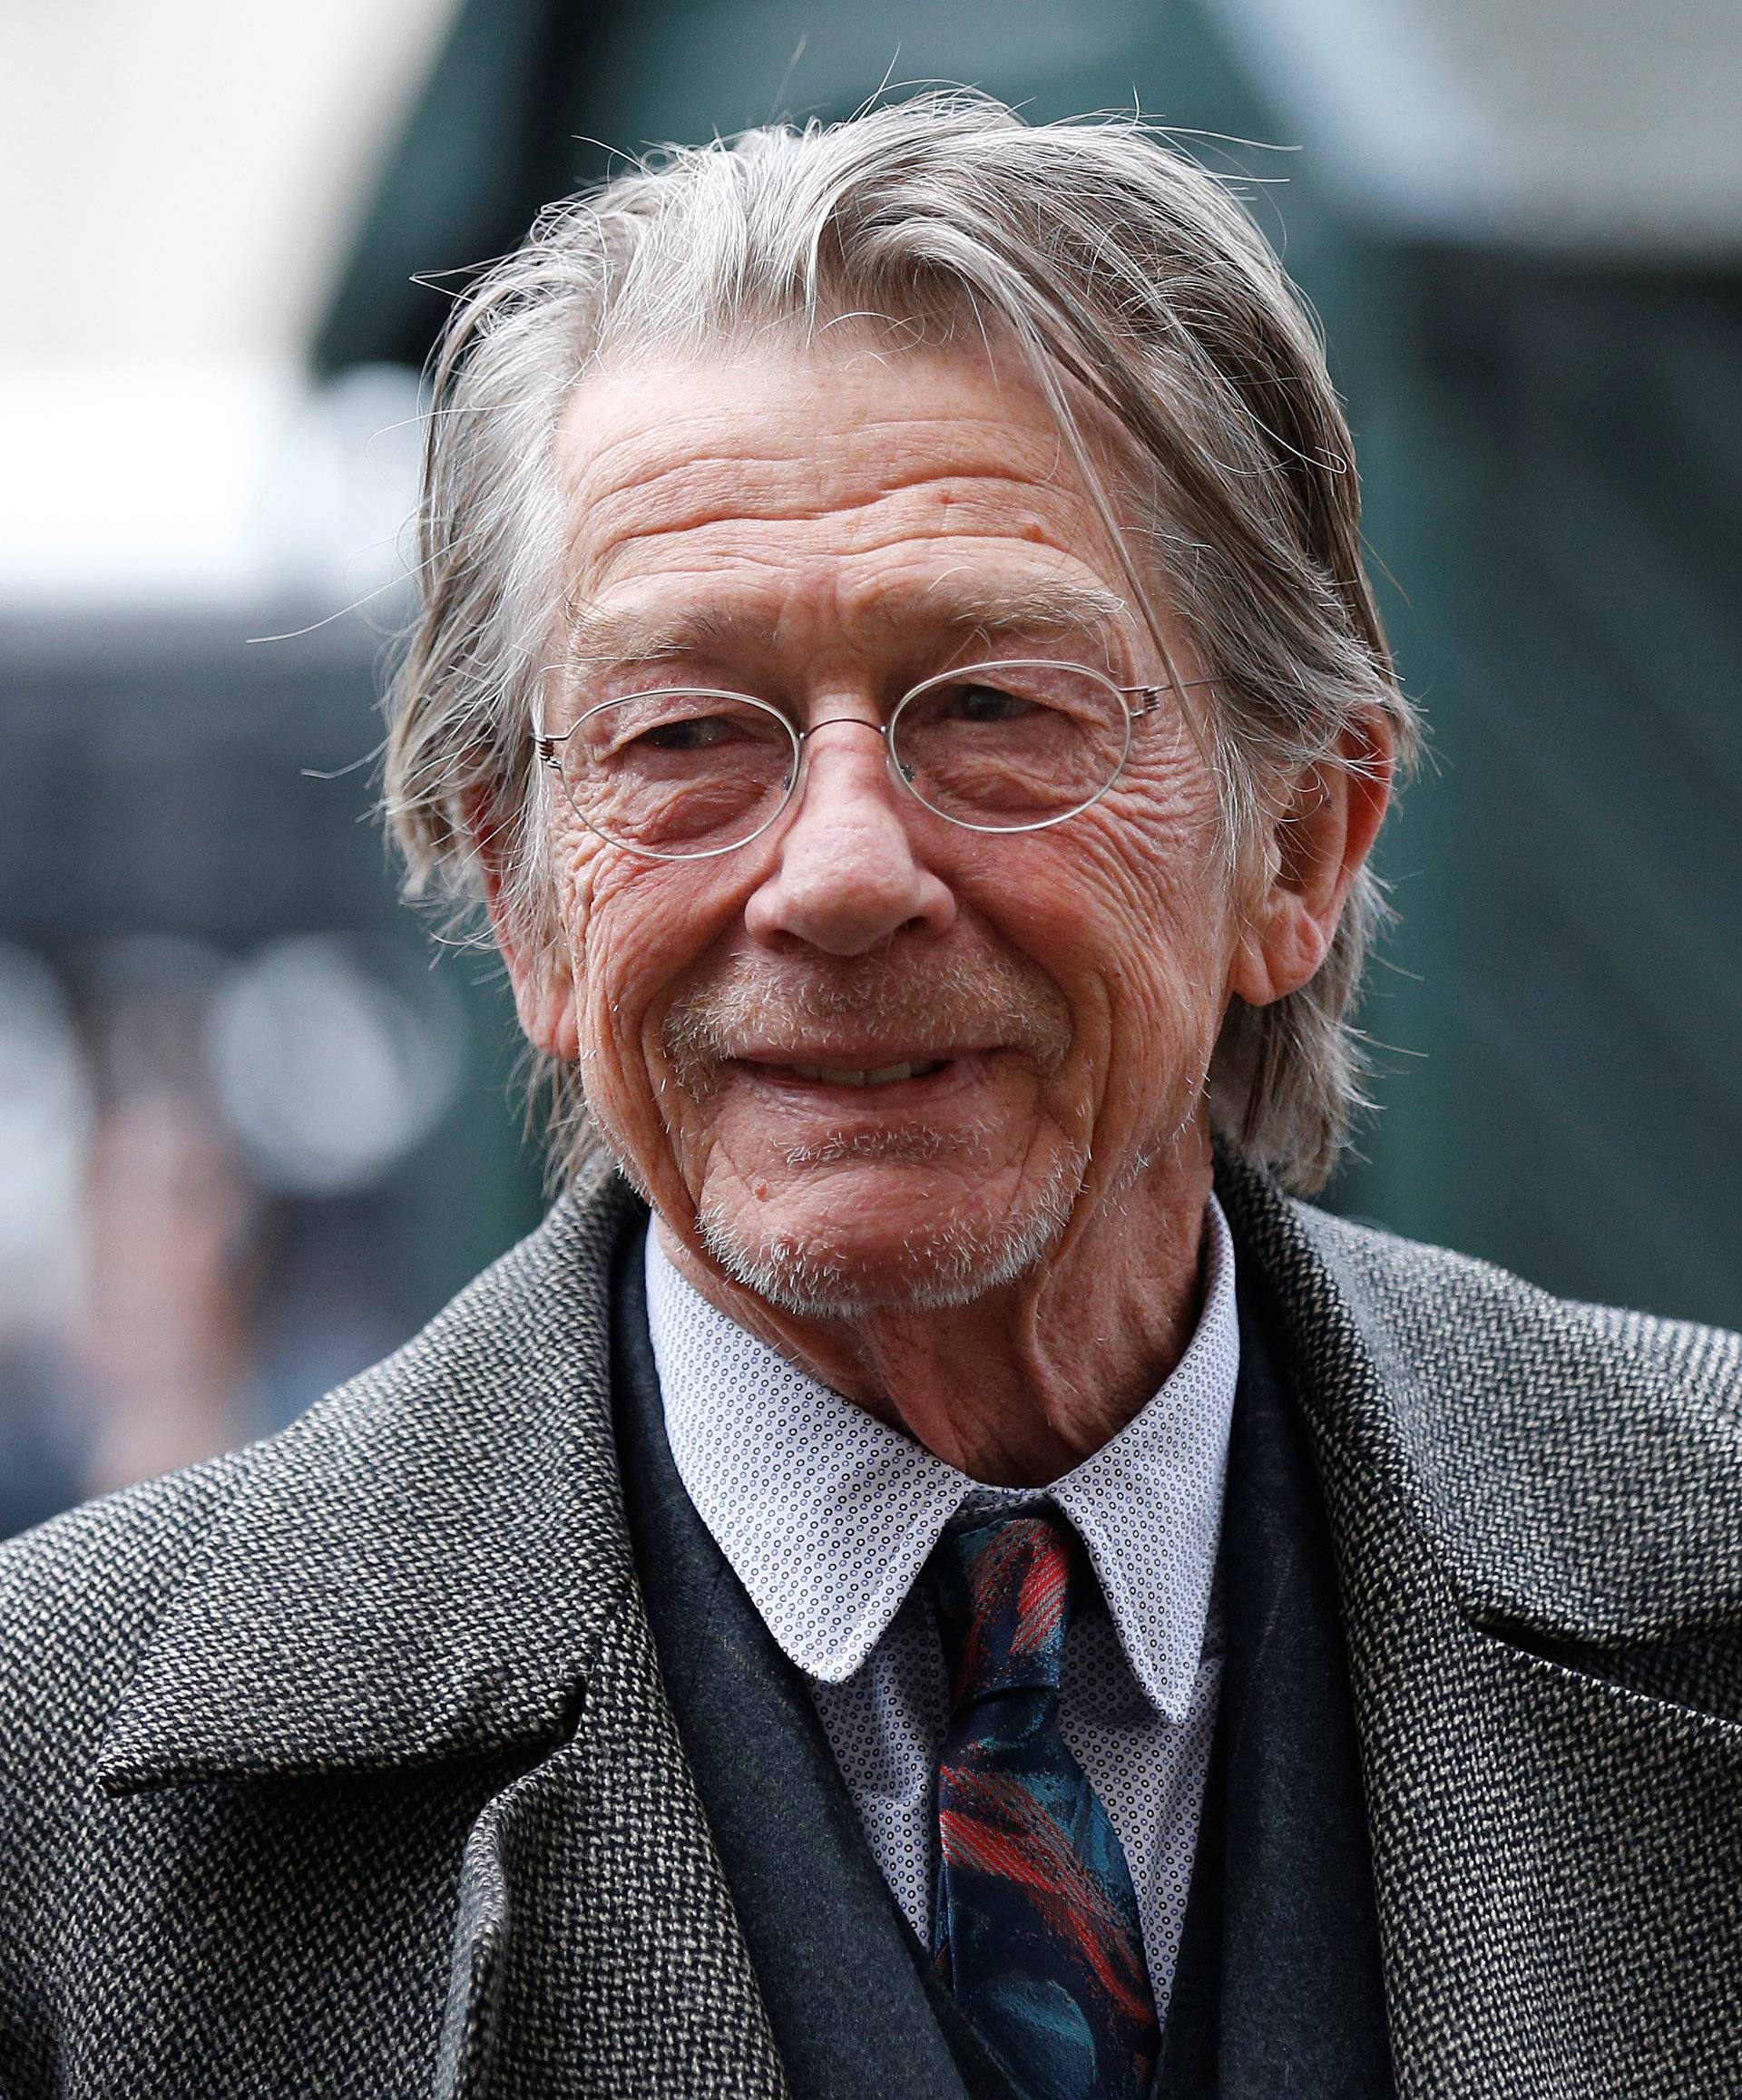 FILE PHOTO: Actor John Hurt arrives for a memorial service for actor and director Richard Attenborough at Westminster Abbey in London